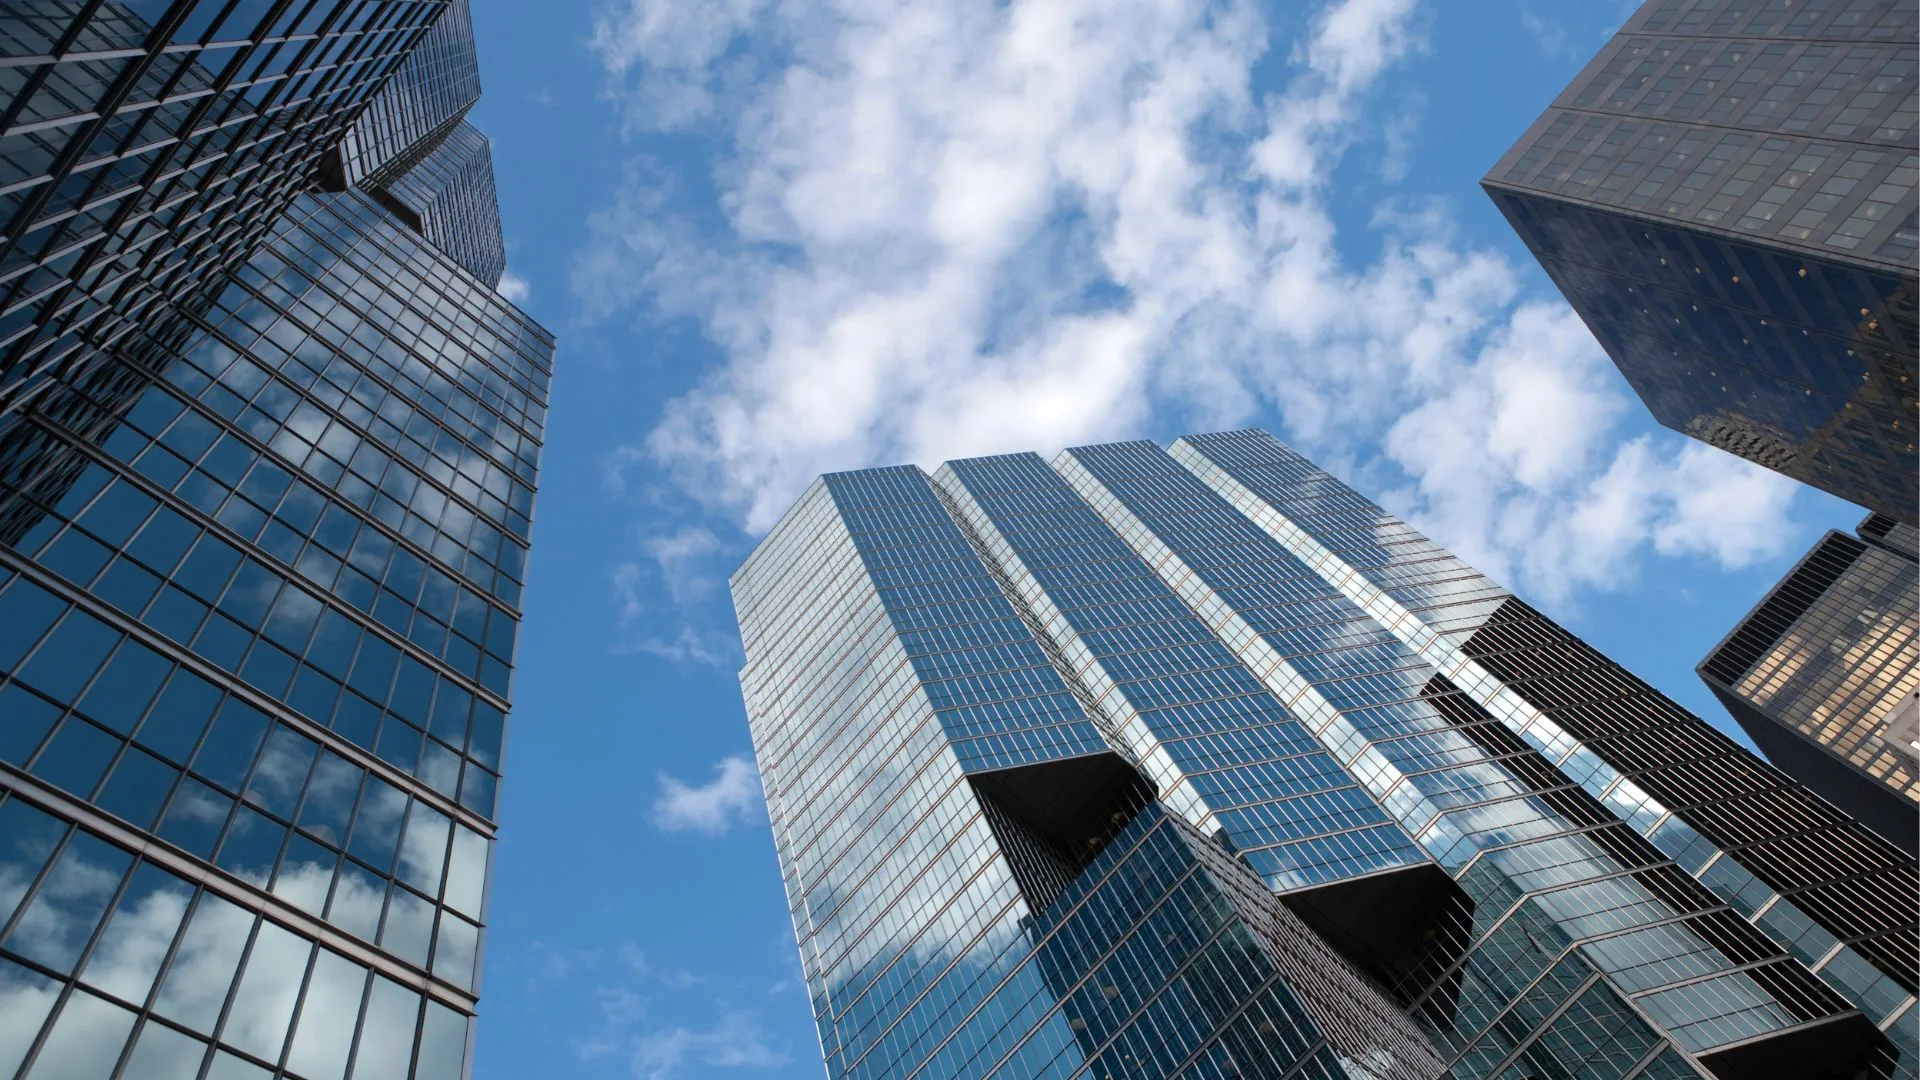 Shot of multiple glass-fronted skyscrapers shot from the ground-up, a bright blue sky with some clouds can be seen above